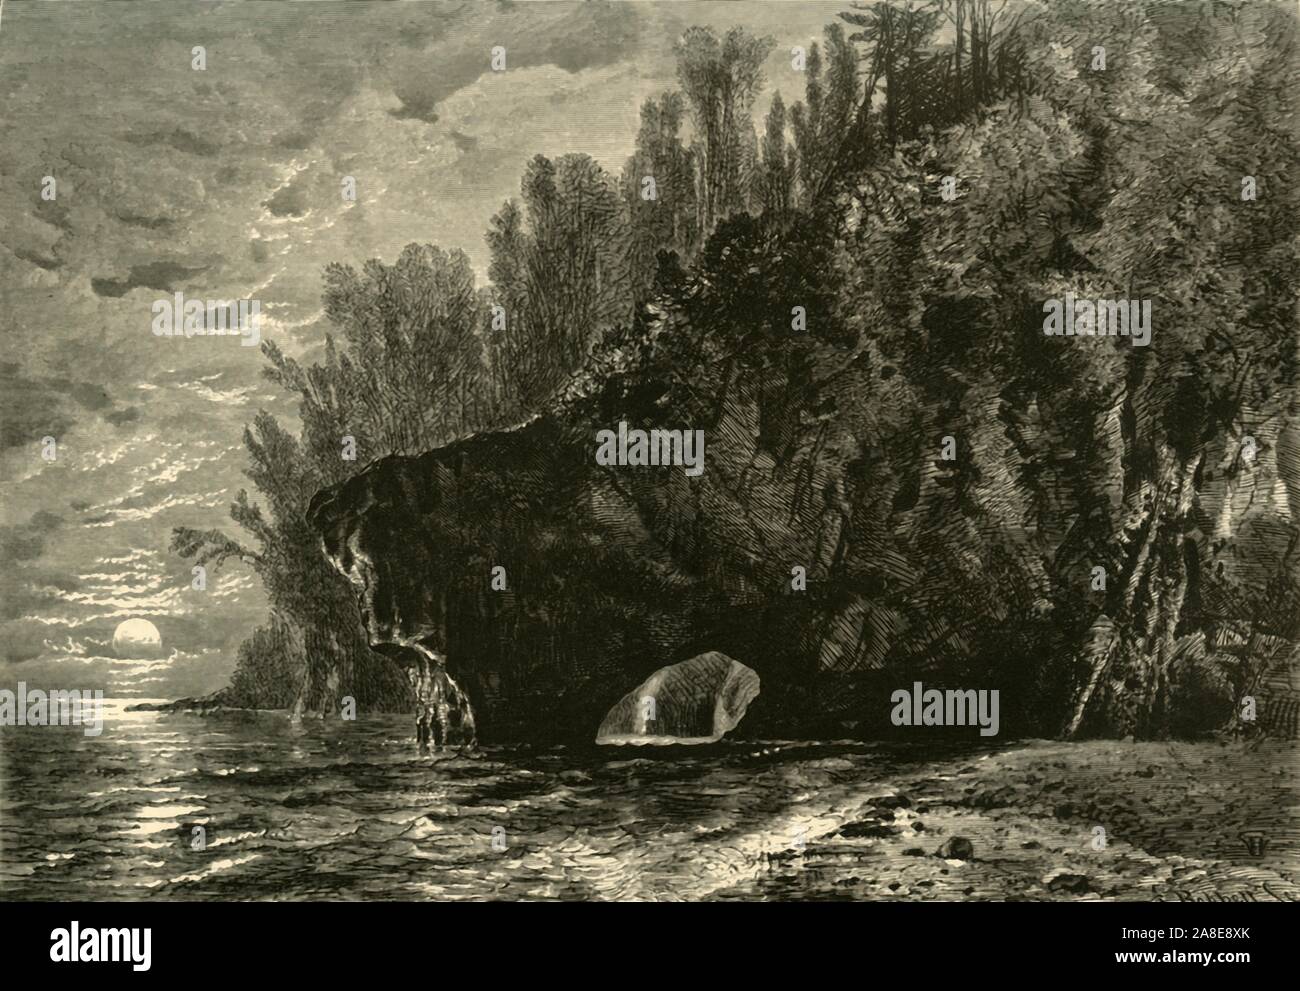 'Spirit Harbor', 1872. Rock arch on the shores of Lake Superior, USA. From &quot;Picturesque America; or, The Land We Live In, A Delineation by Pen and Pencil of the Mountains, Rivers, Lakes...with Illustrations on Steel and Wood by Eminent American Artists&quot; Vol. I, edited by William Cullen Bryant. [D. Appleton and Company, New York, 1872] Stock Photo